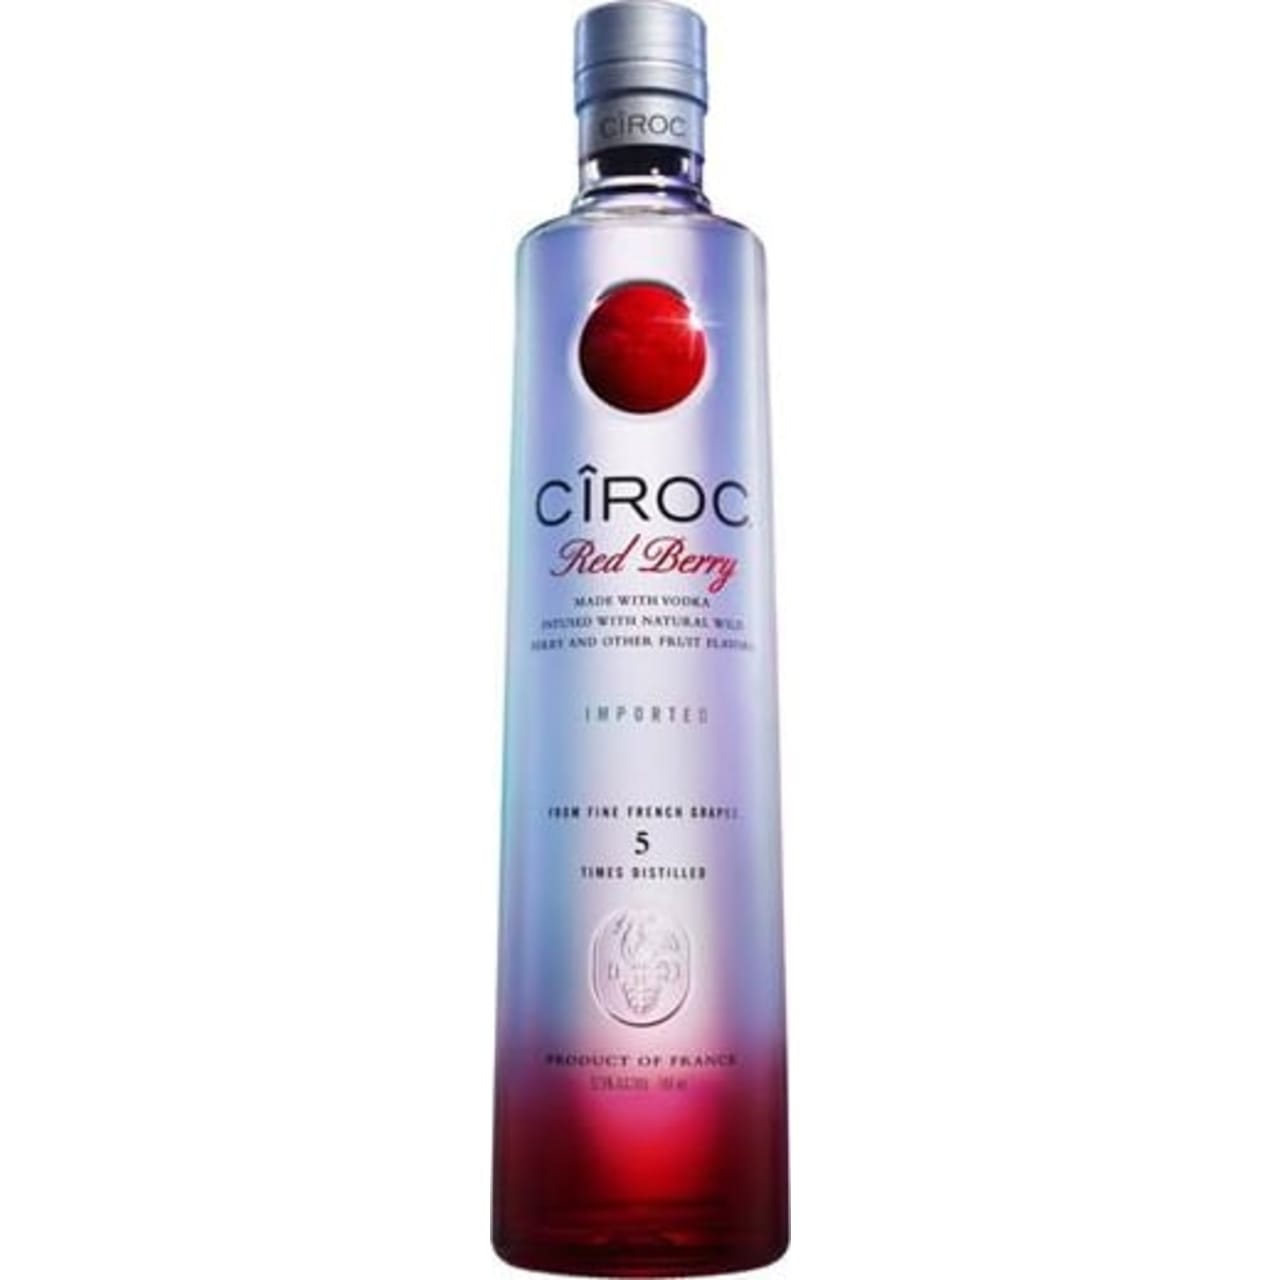 CÎROC Red Berry oozes aromatic fresh berry flavours with a smooth and silky finish.